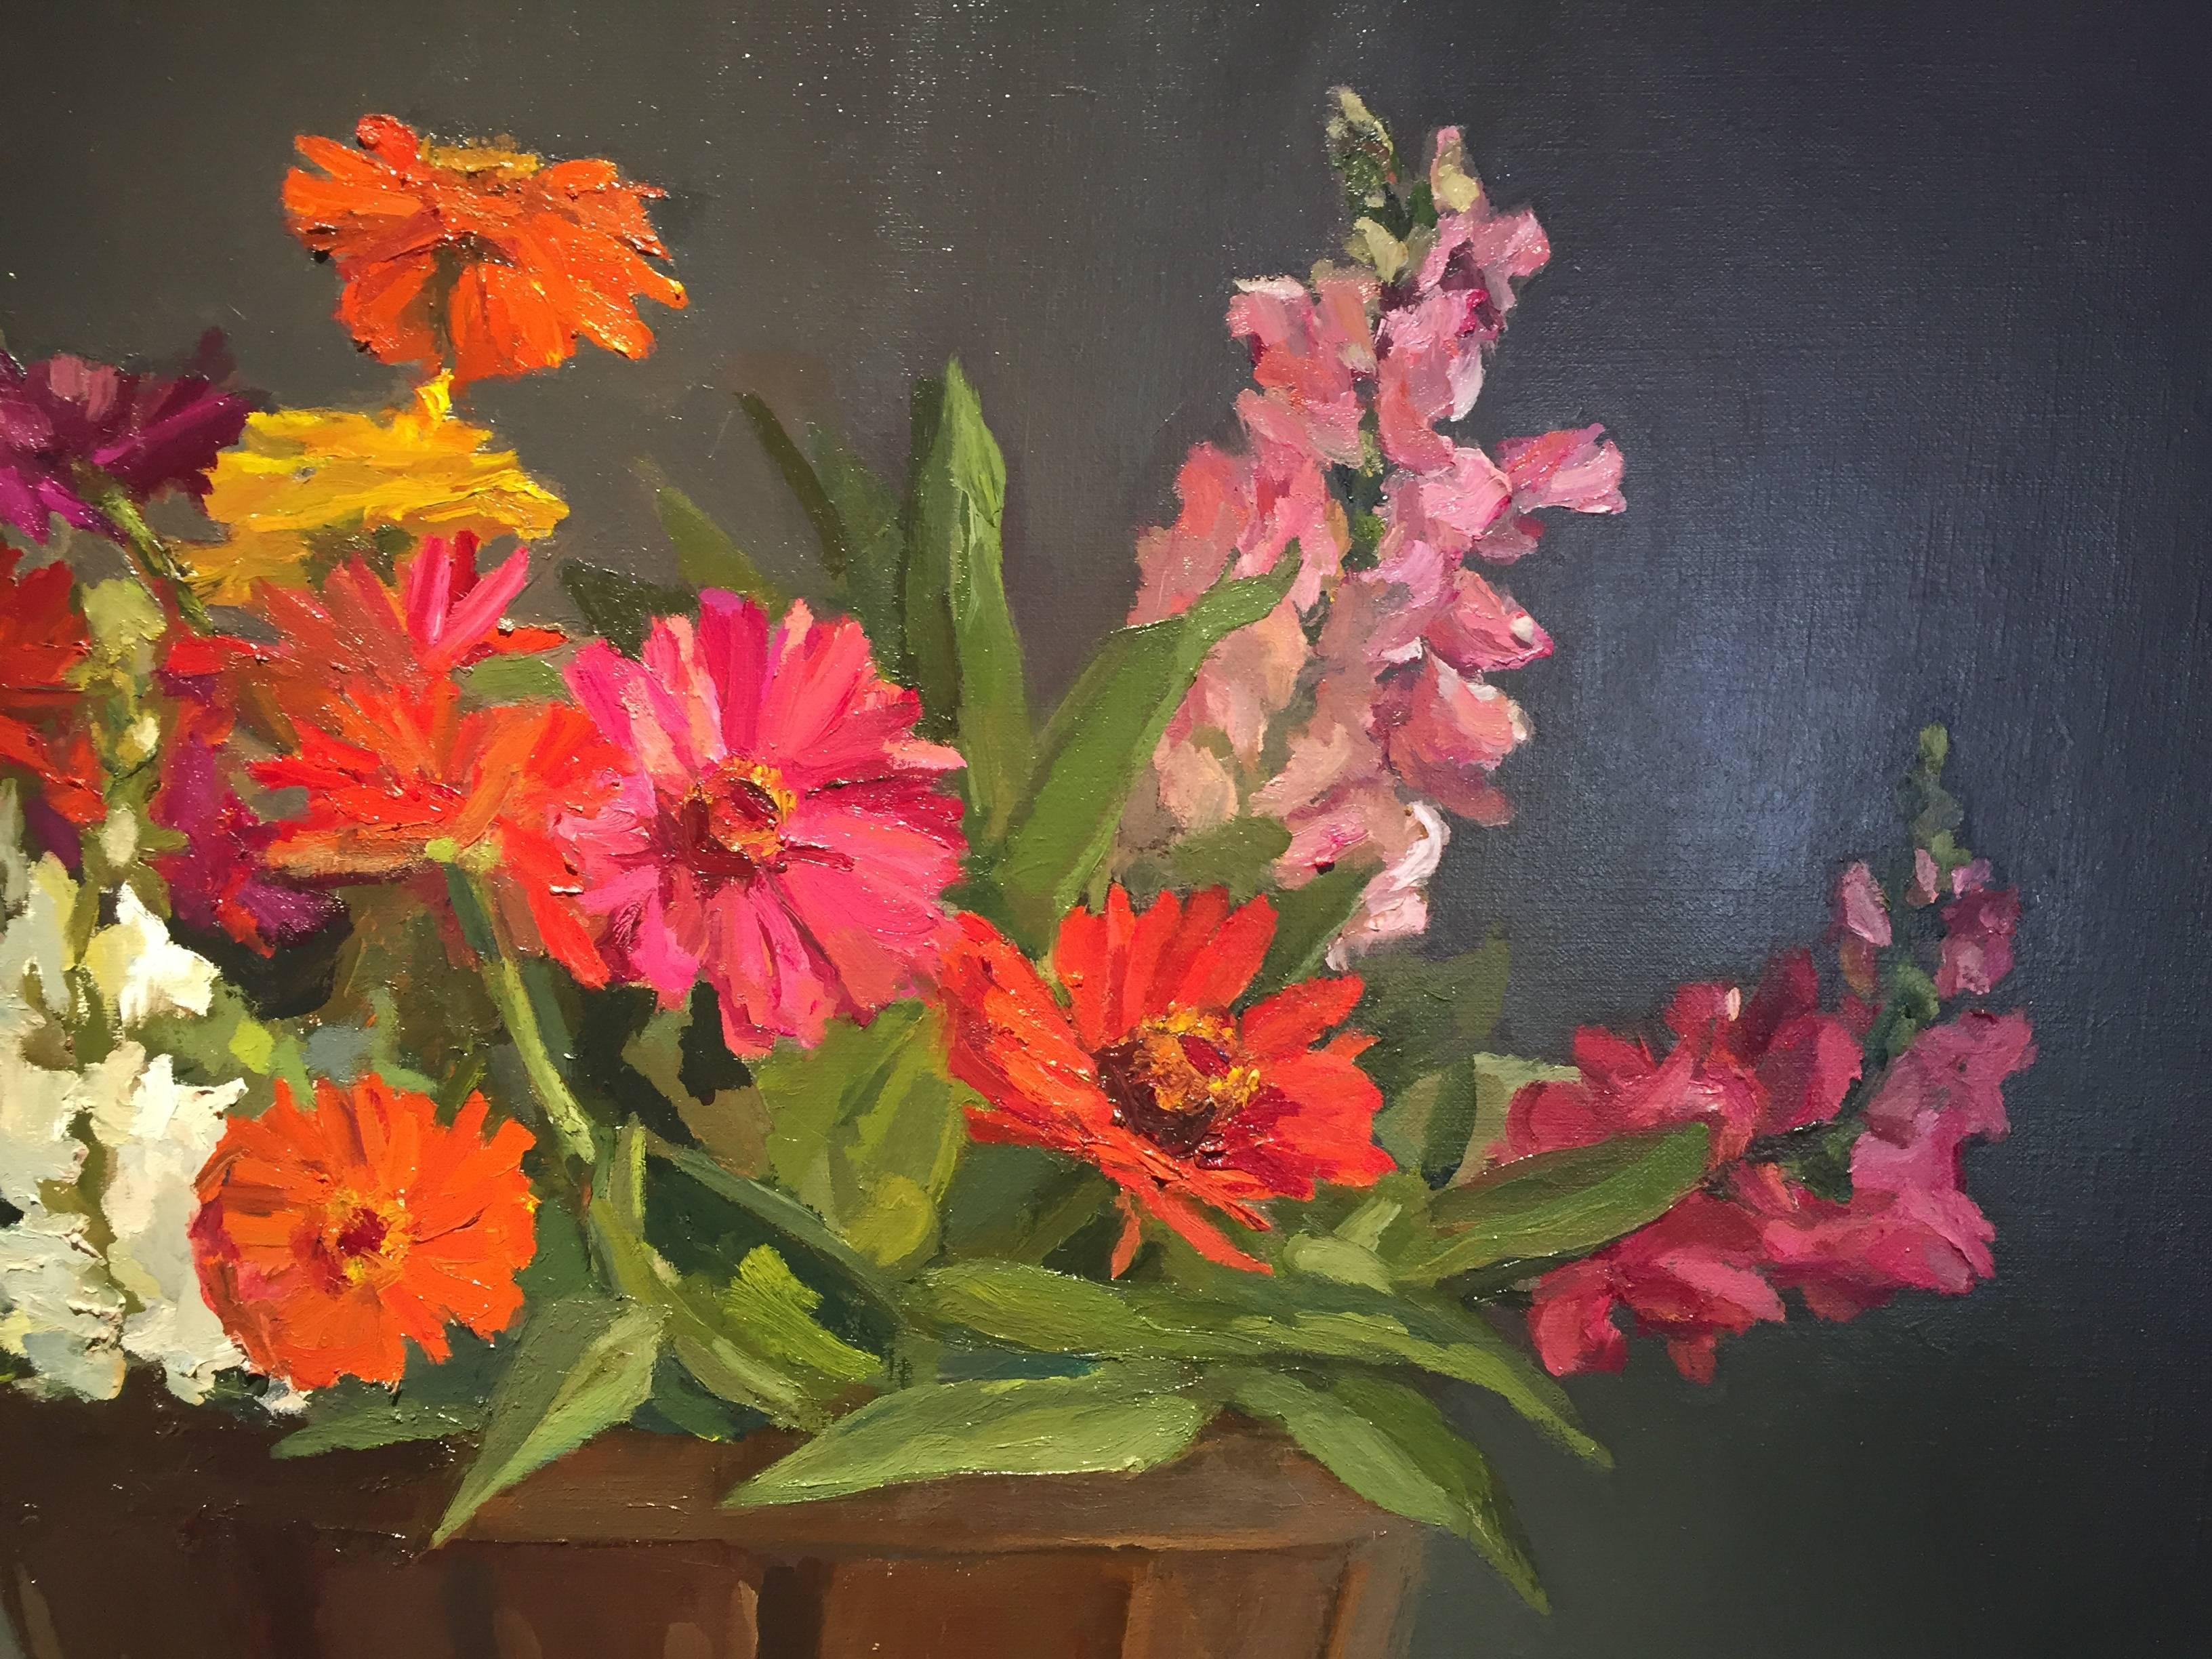 Painted from life in the artist's studio, a rustic, wooden basket overflows with bright colored flowers. Four apples scattered in the foreground, cast shadows, and reflect on the grounds surface. 

Maryann Lucas lives and works in Sag Harbor. She is